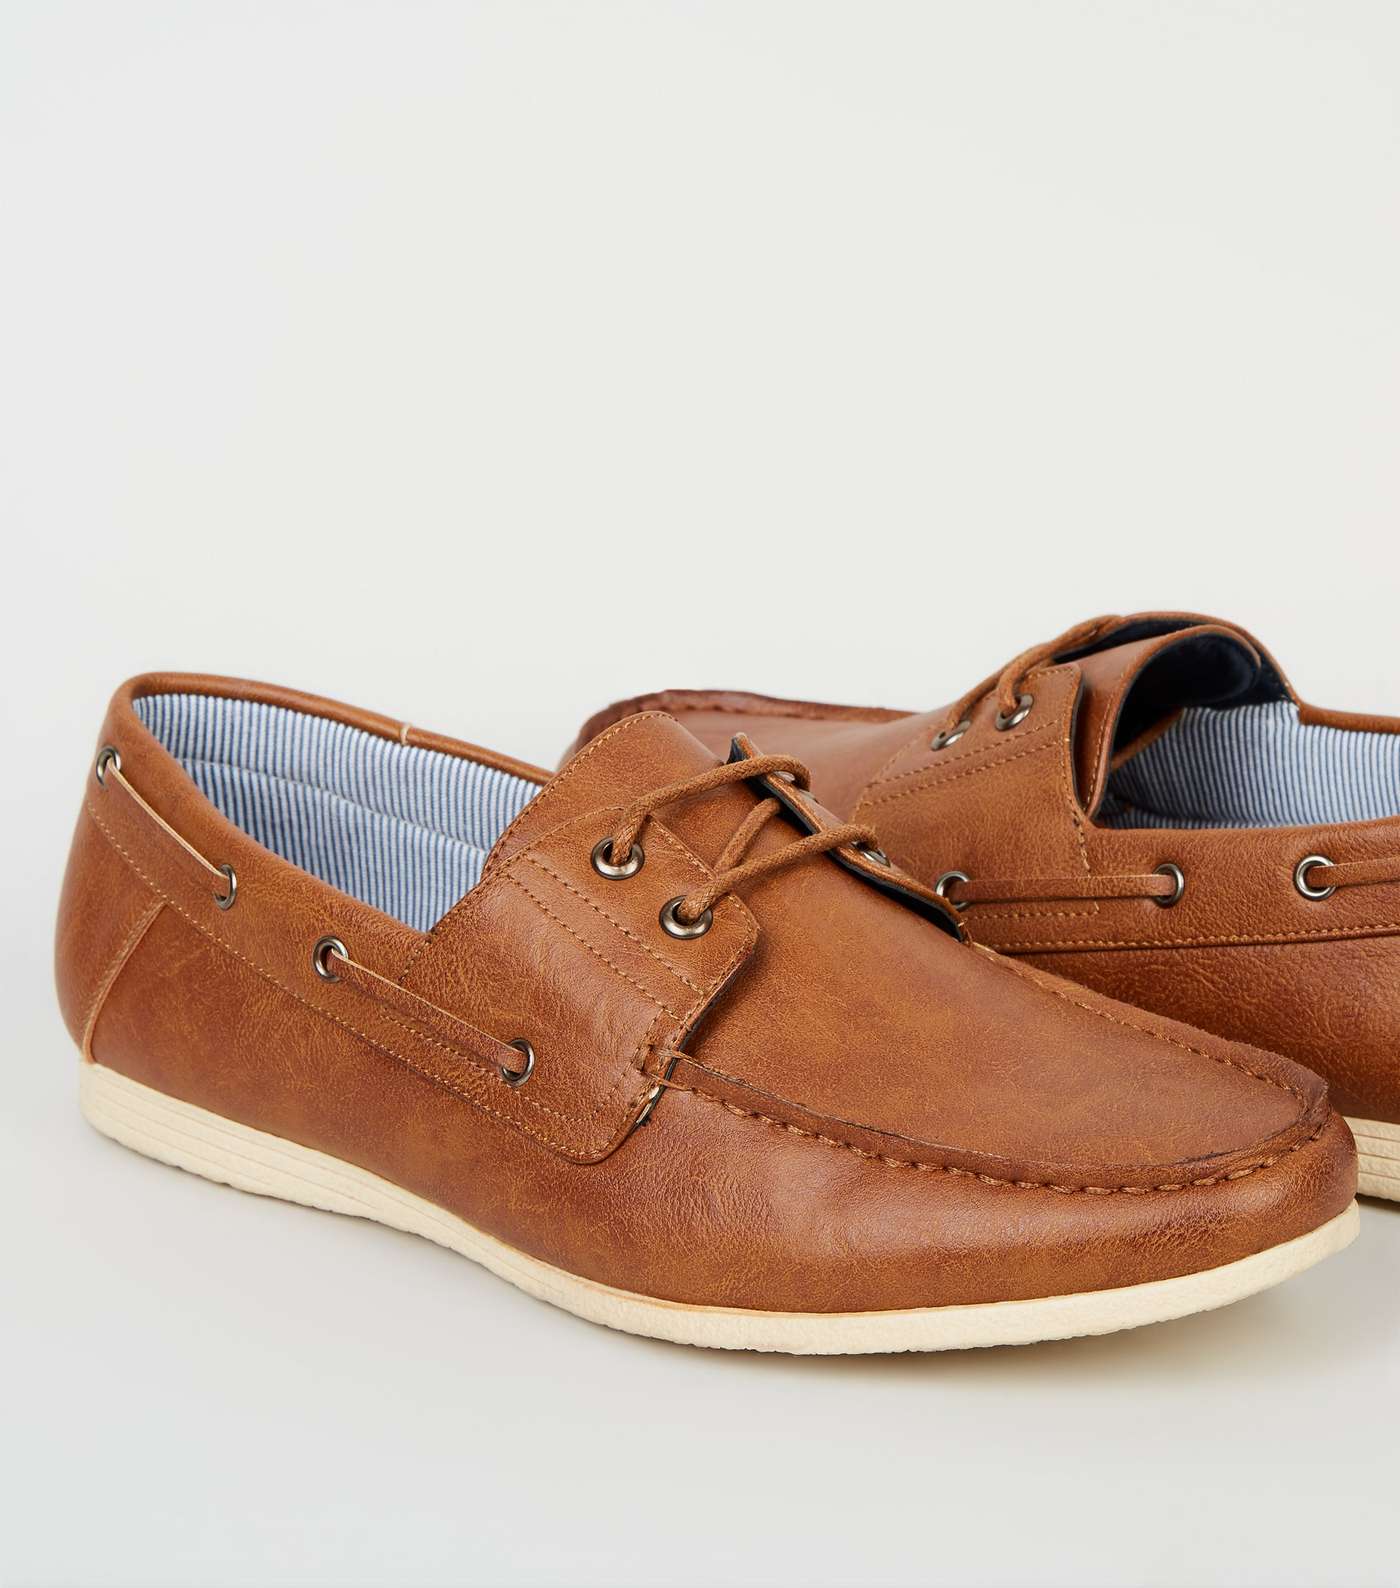 Tan Leather-Look Boat Shoes Image 4